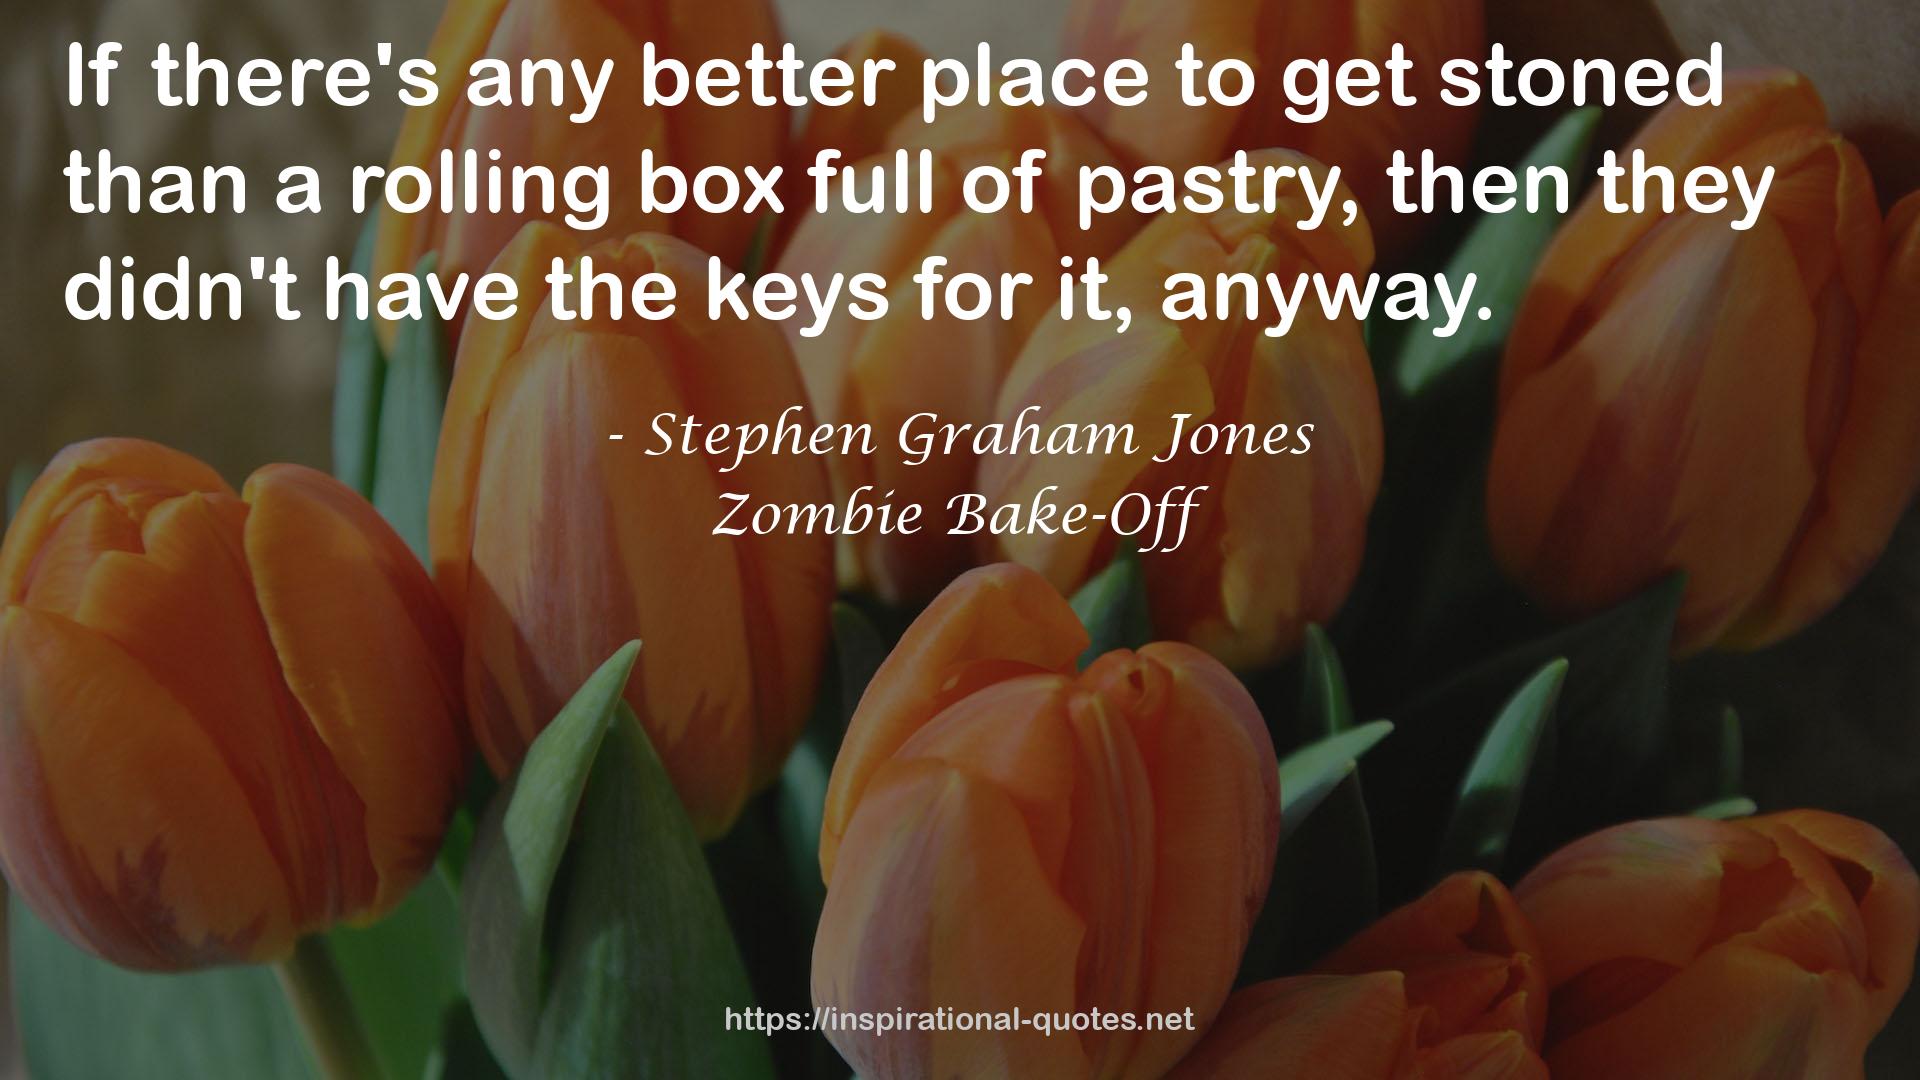 Zombie Bake-Off QUOTES